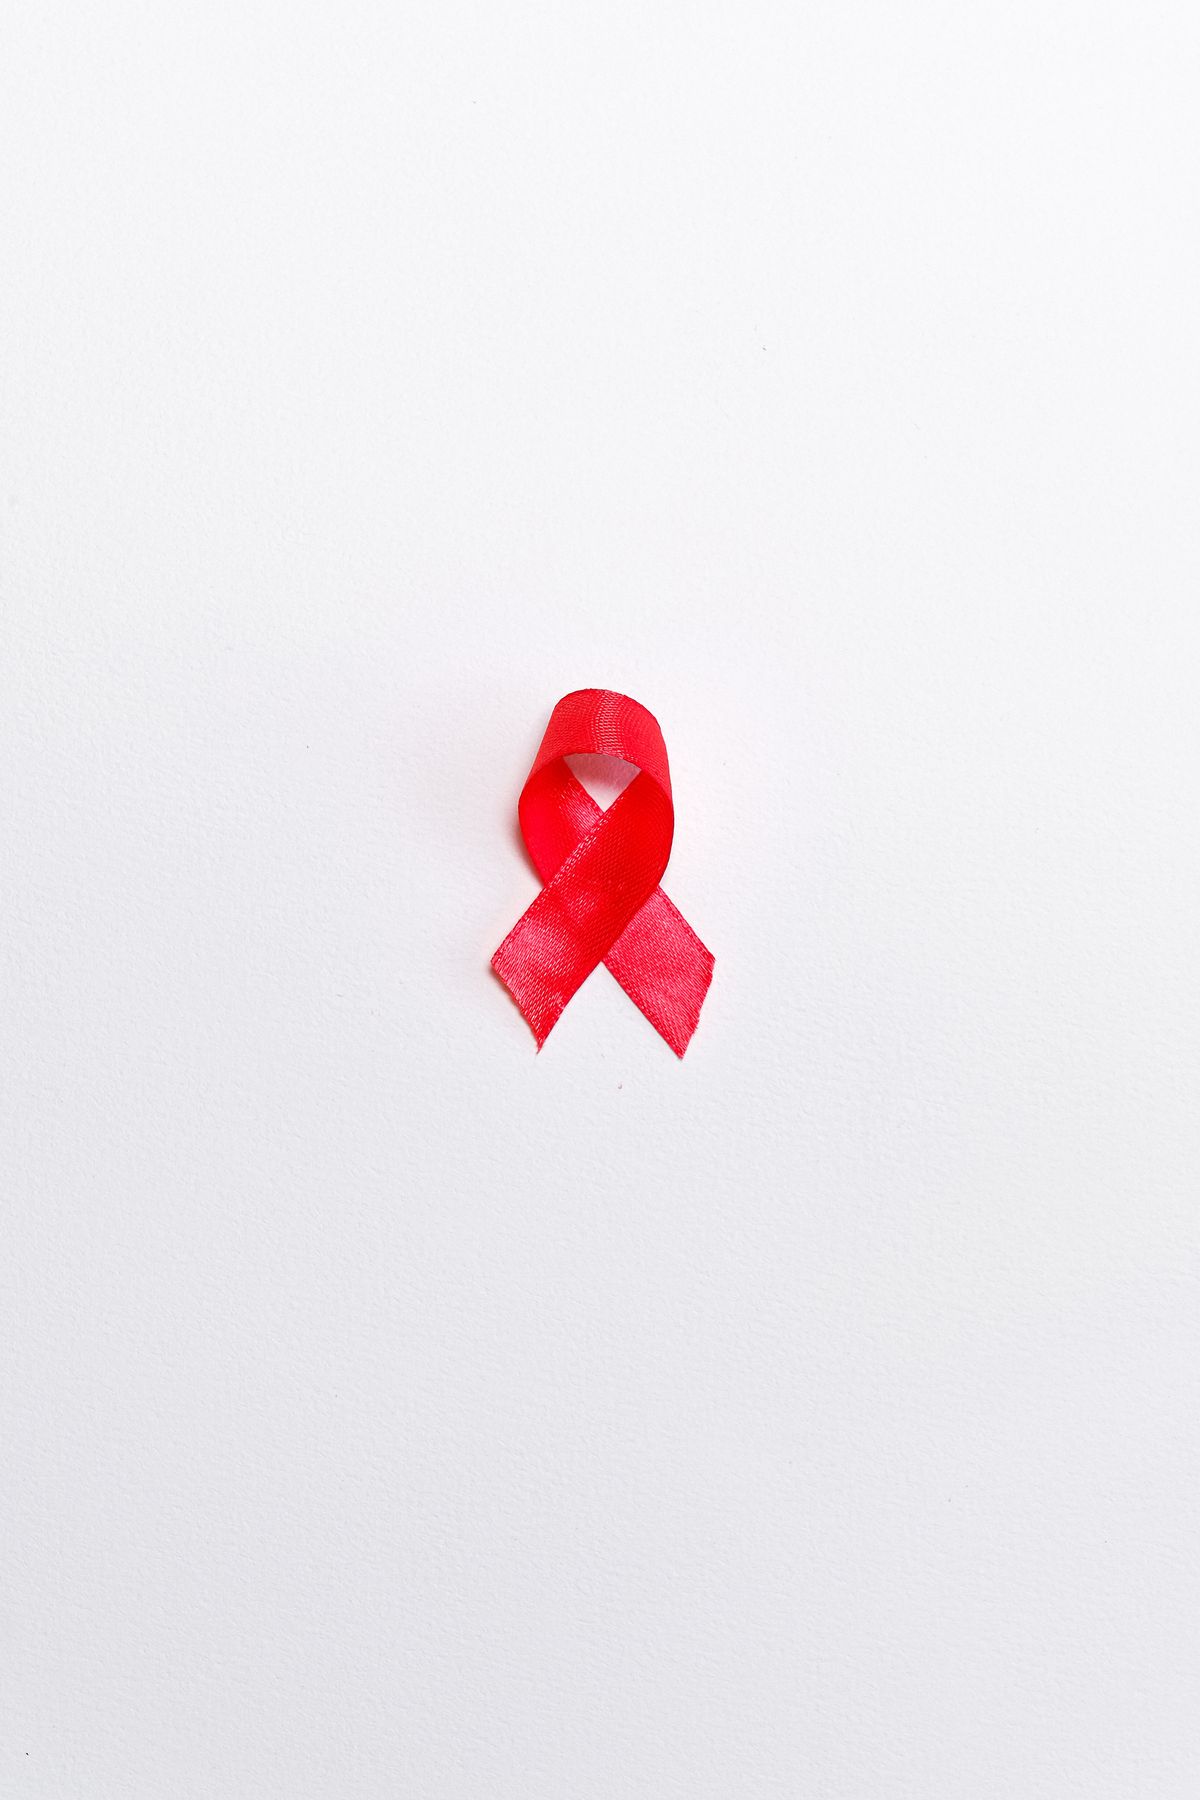 The status of HIV & AIDS in 2023